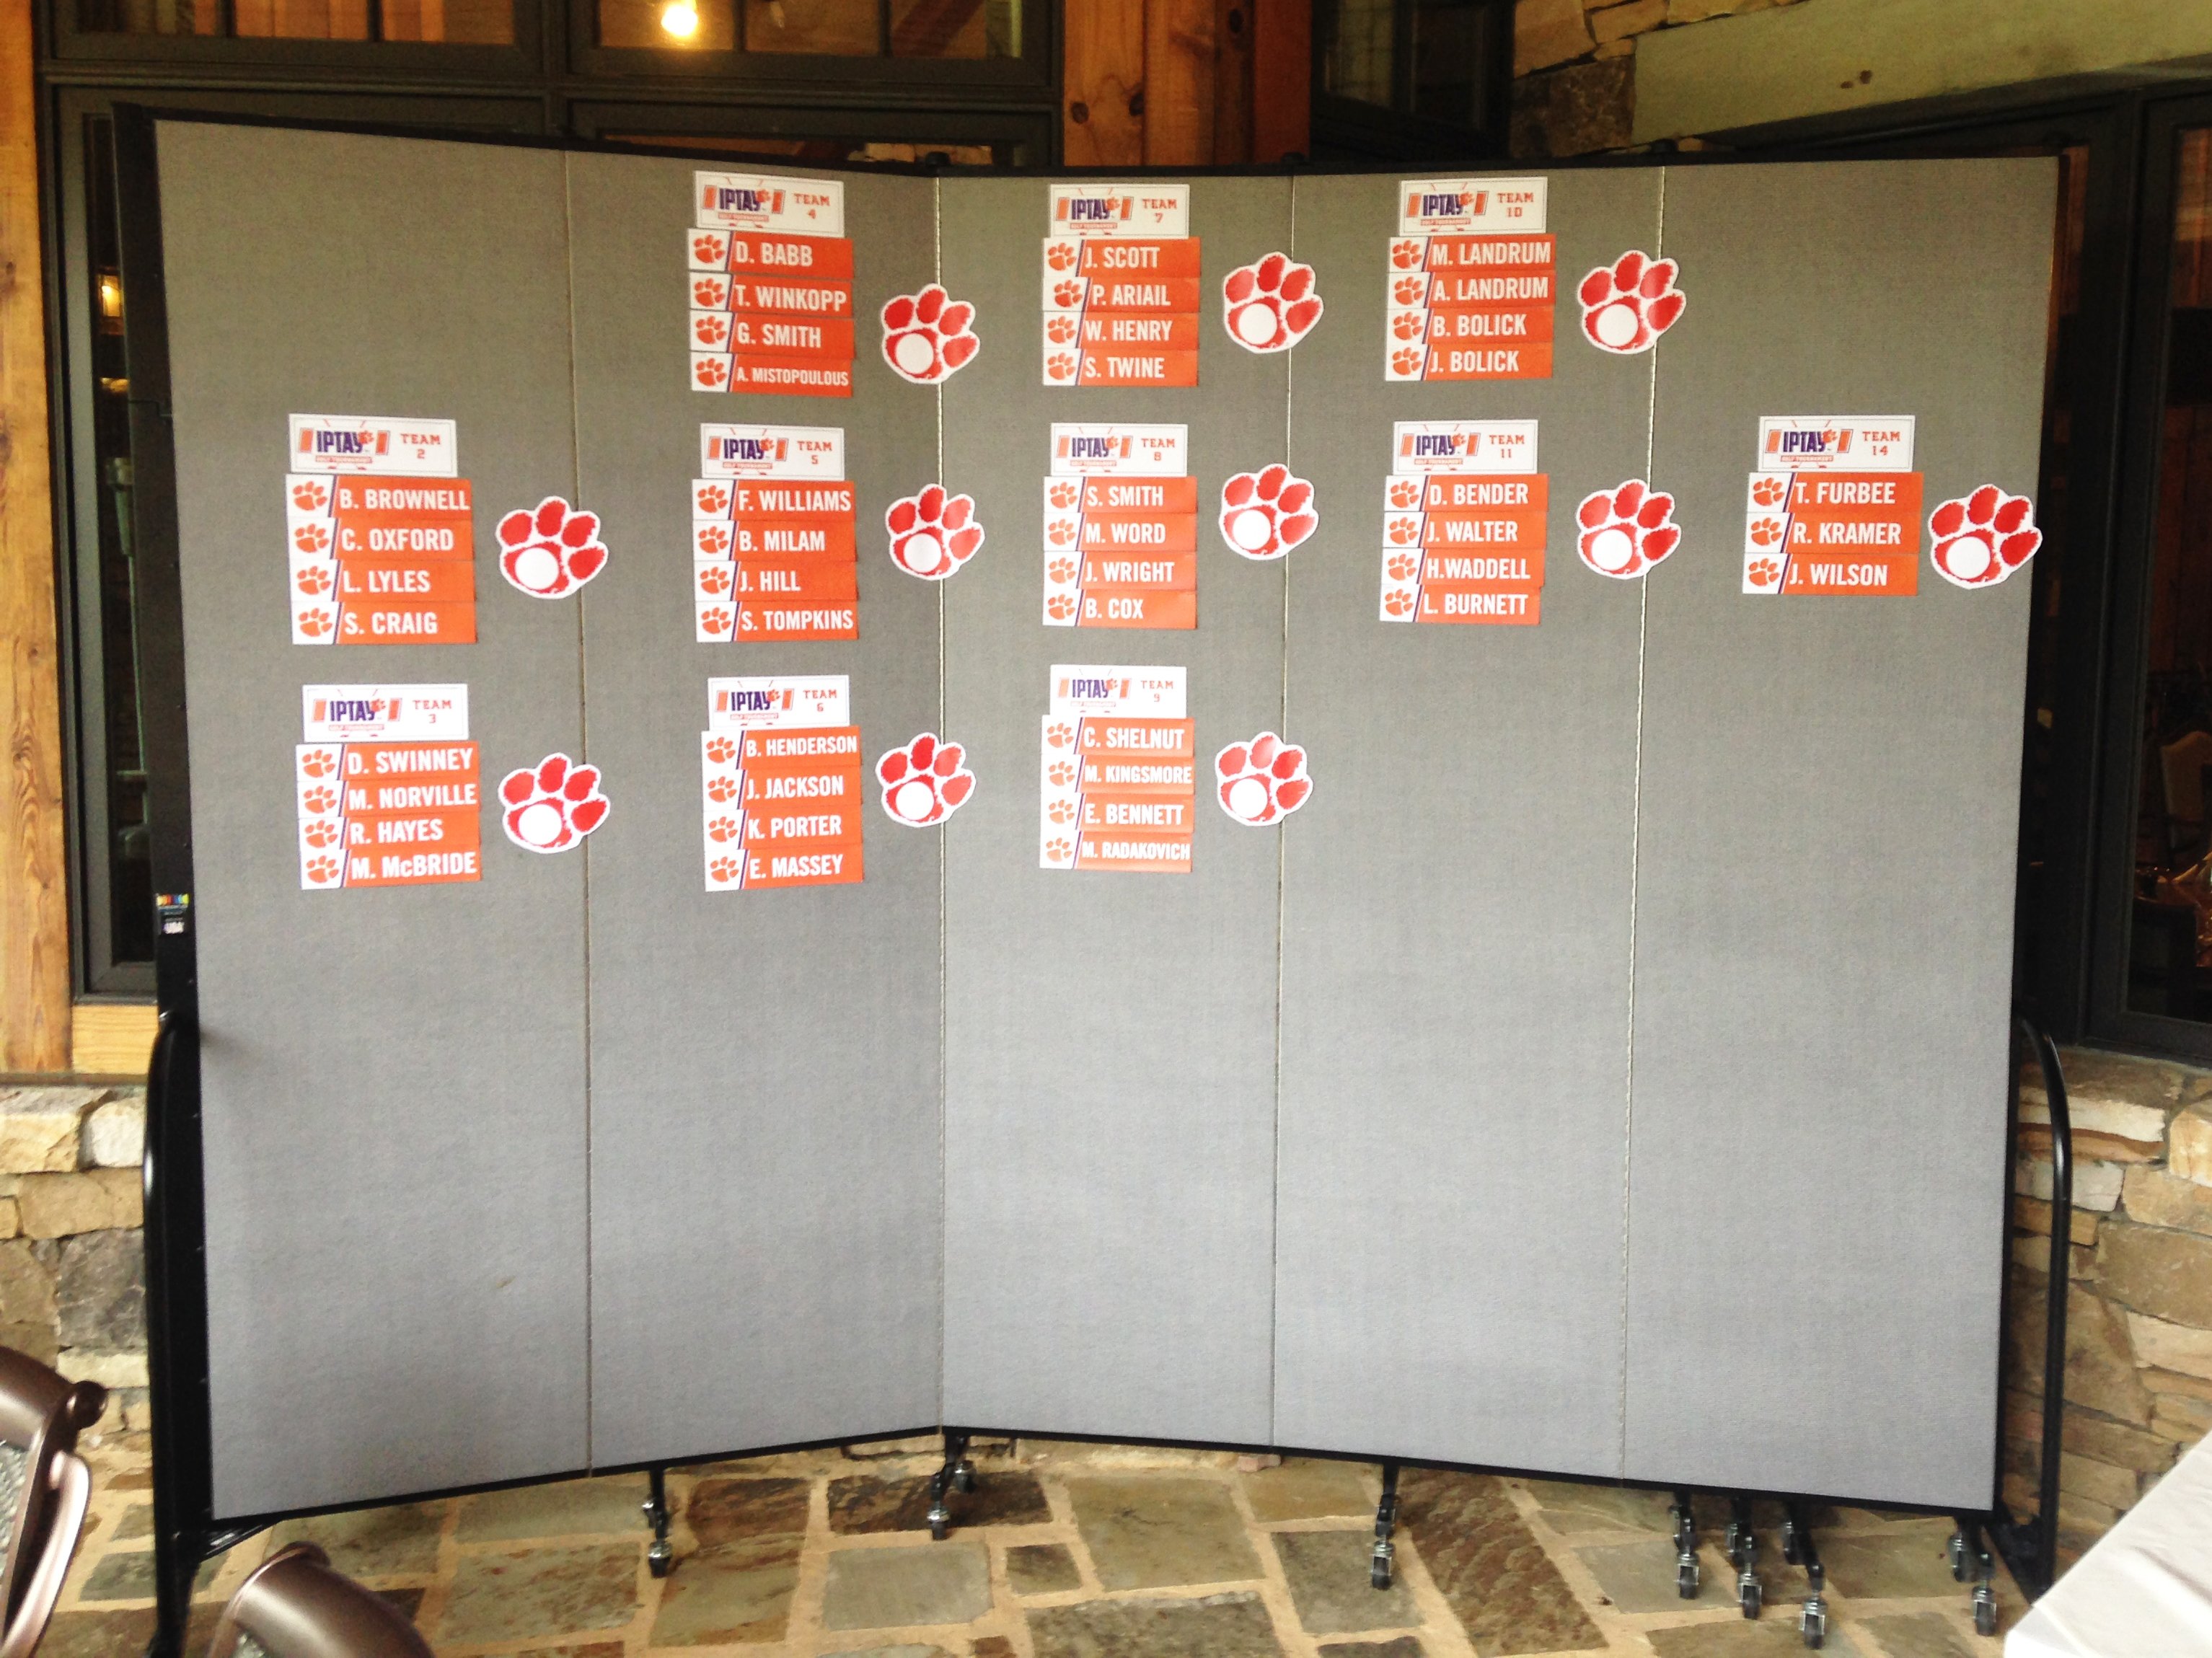 Moveable walls are used to display golf score cards for a tournament